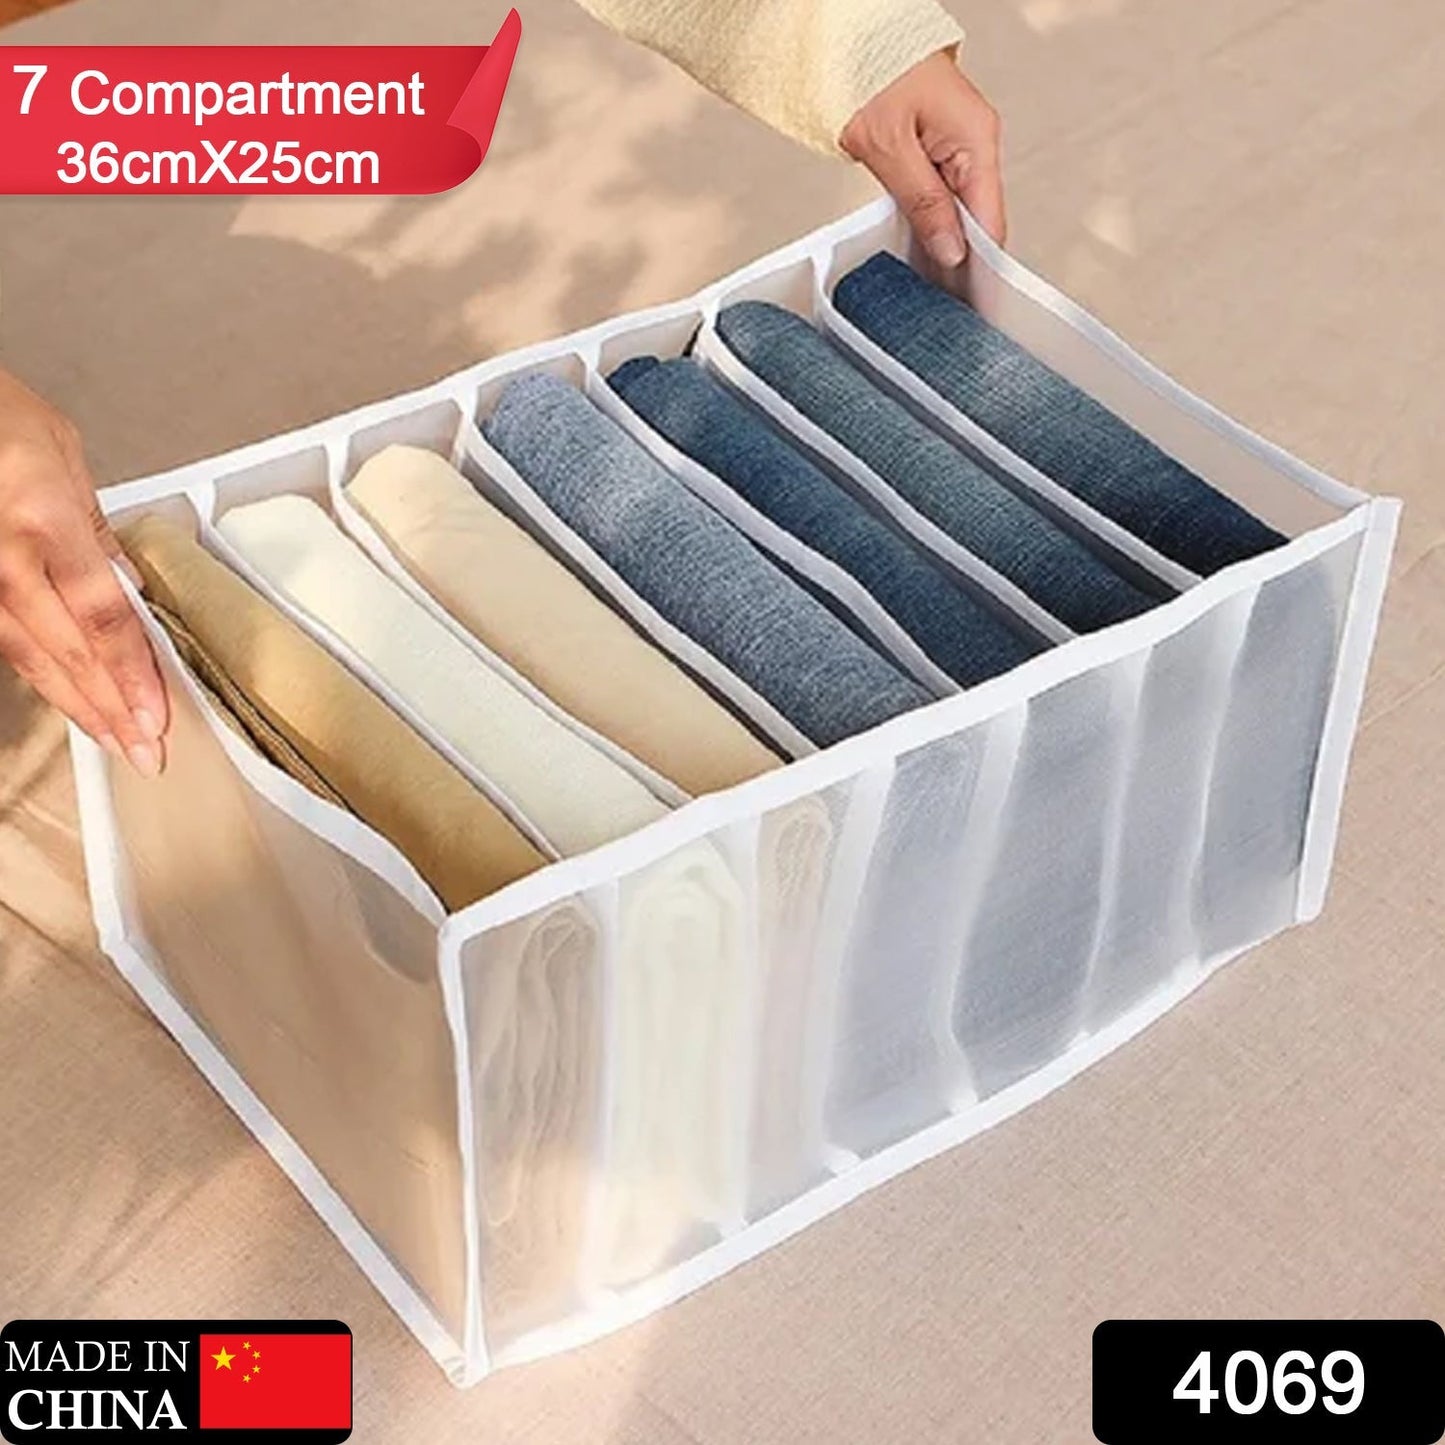 4069 Clothes Organizer +7 Grid, Drawer Wardrobe Clothes Organizer, Jeans Closet Cabinet Organizers, Portable Foldable Storage Containers DeoDap